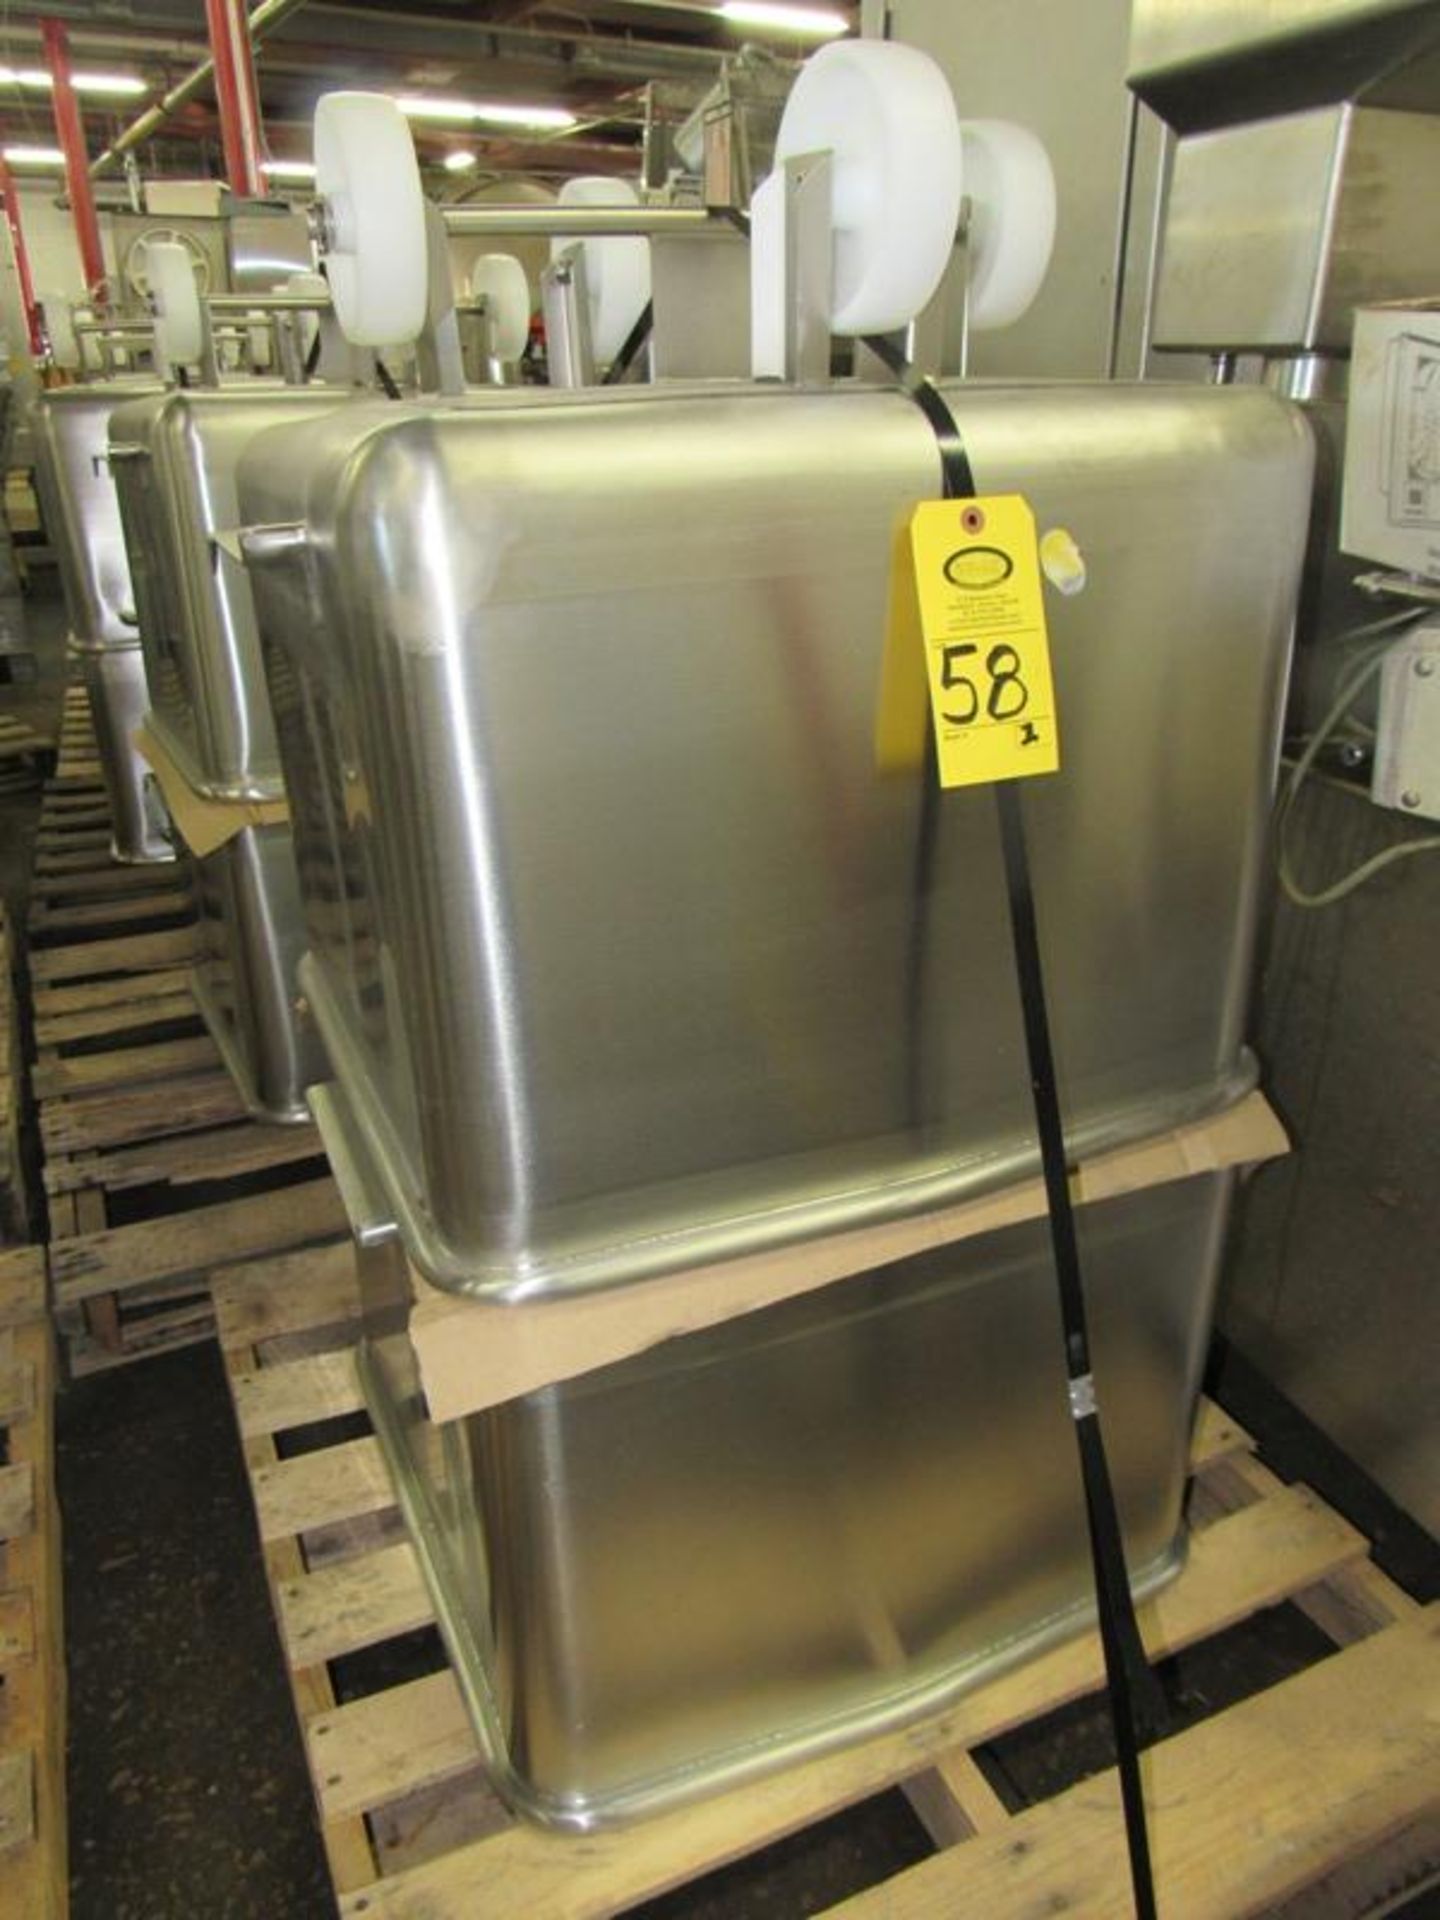 Stainless Steel Dump Buggies, 400 Lb. capacity (new) (Required Loading Fee $50- Pickup by